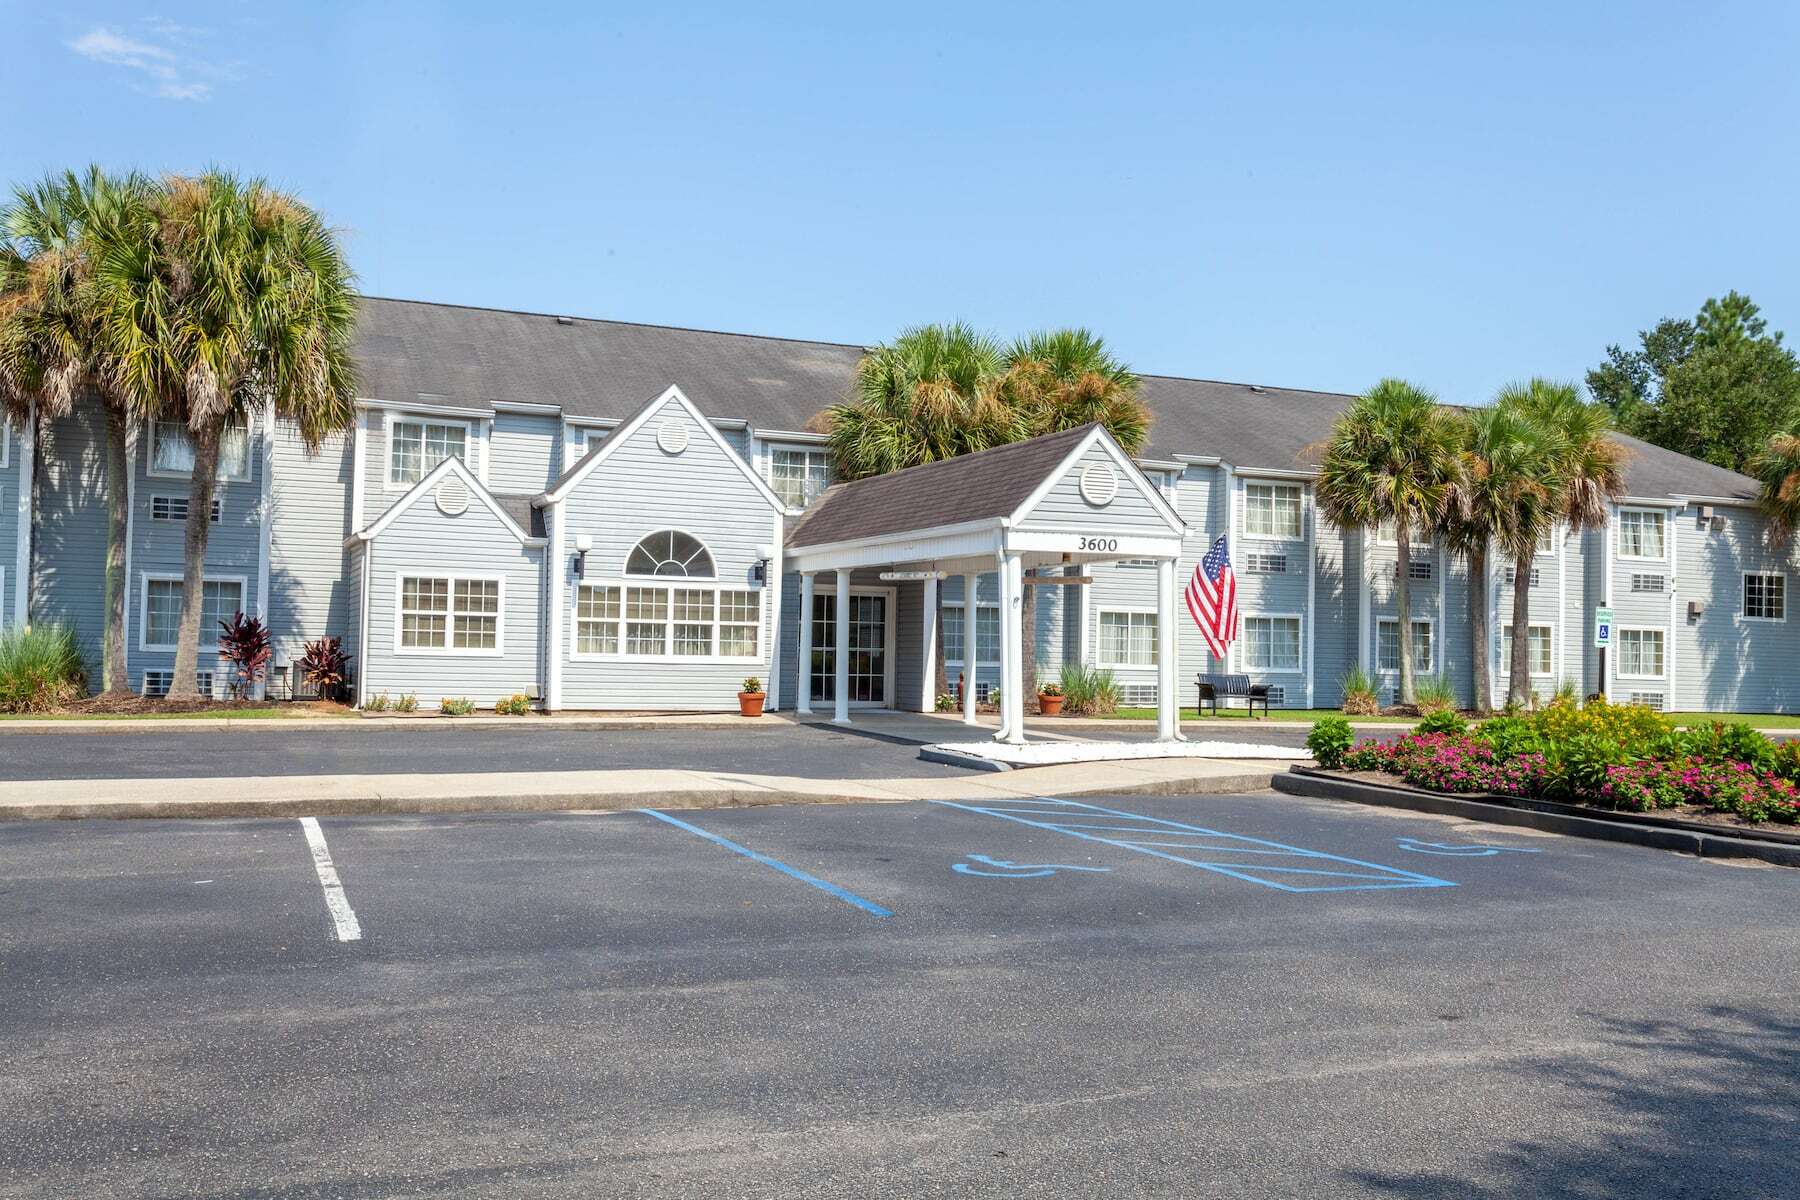 Photo of Microtel Inn & Suites by Wyndham Gulf Shores, Gulf Shores, AL